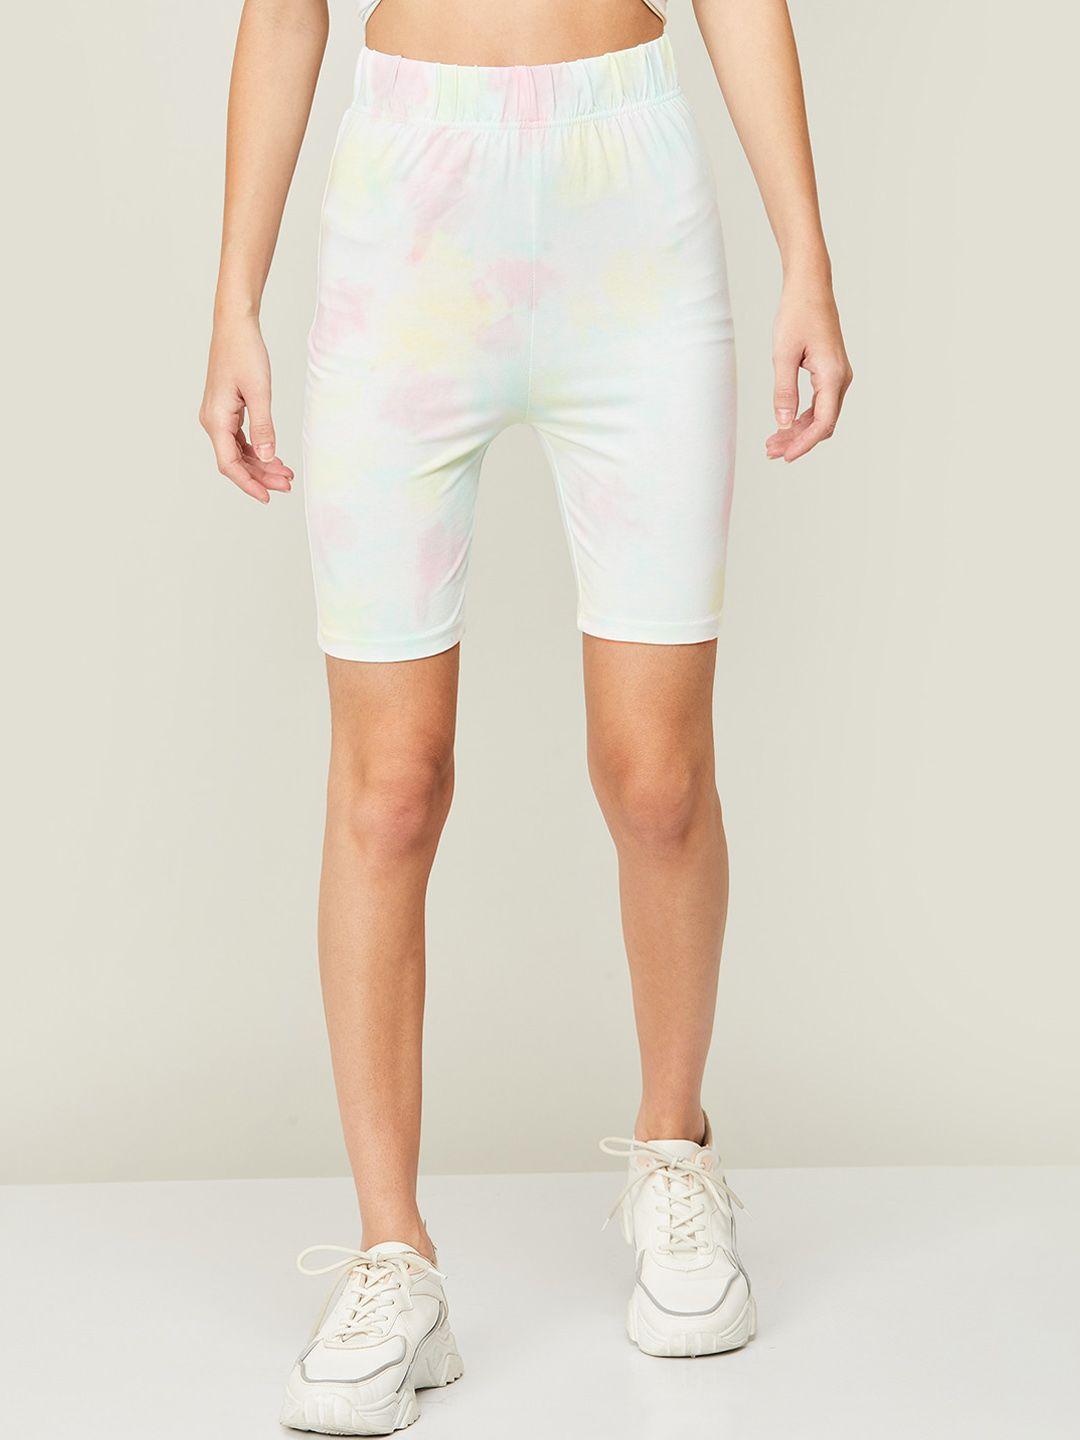 ginger by lifestyle women tie & dye printed cotton sports shorts